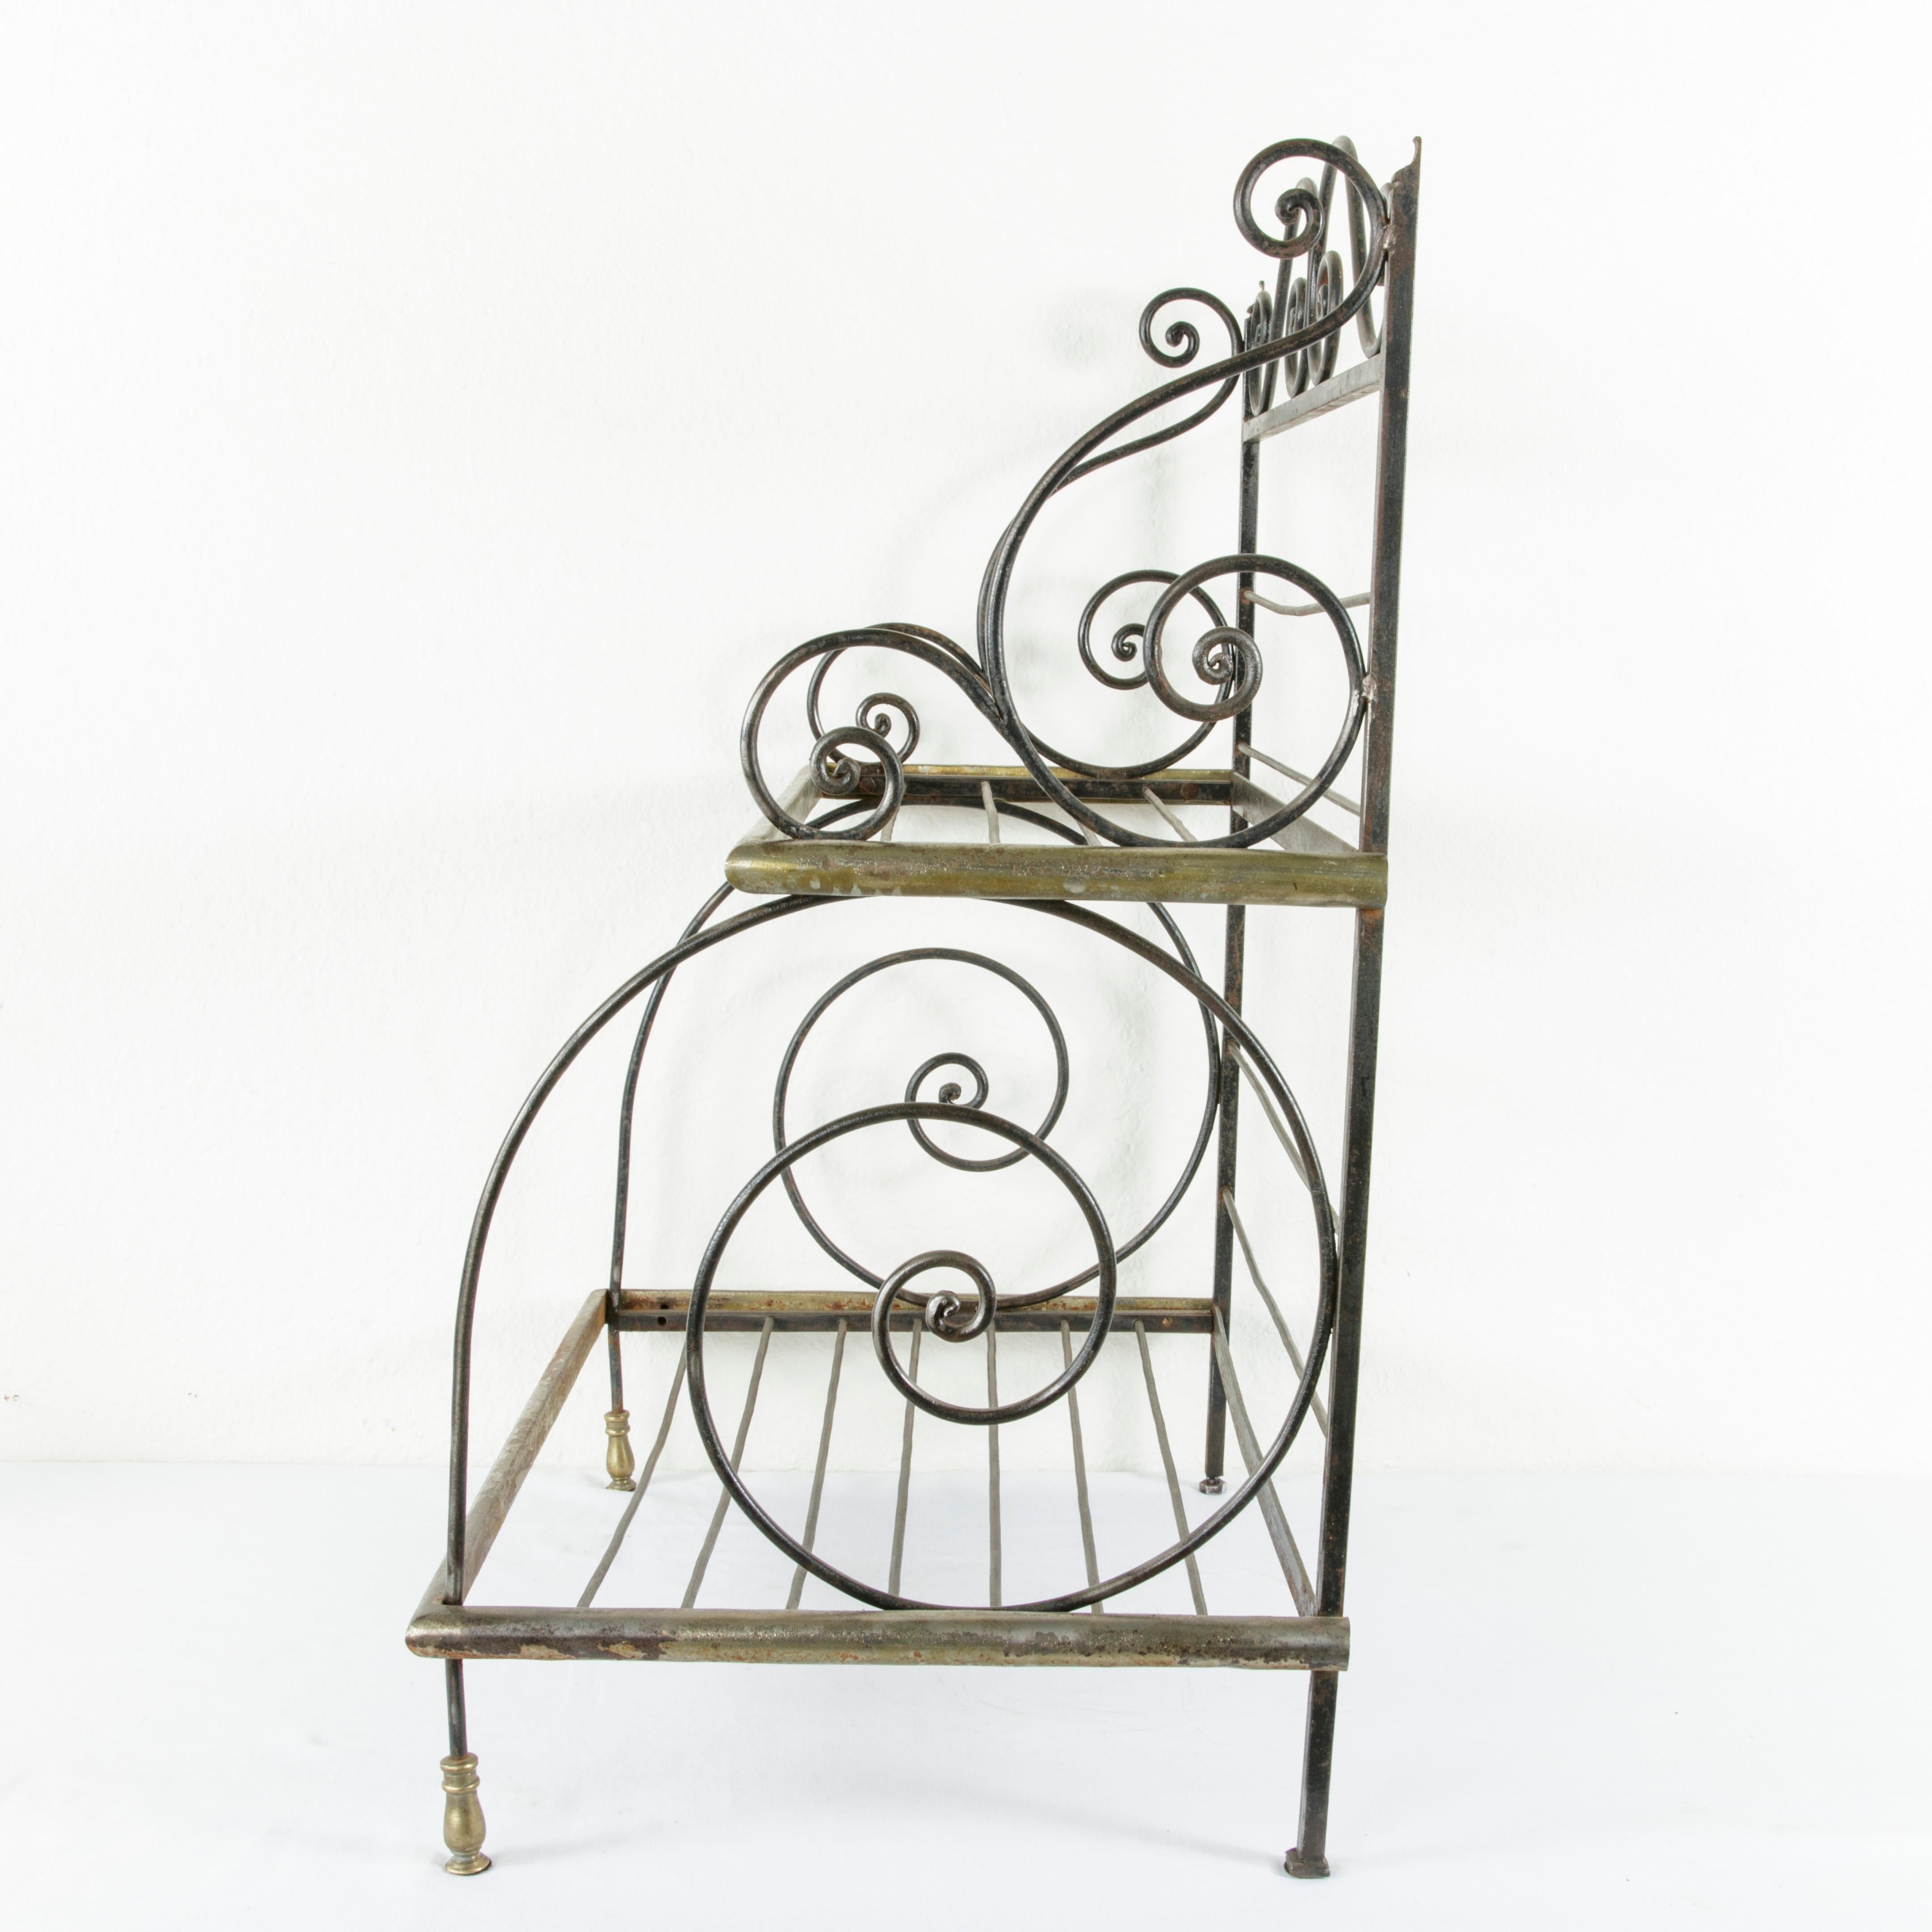 Plated Mid-20th Century French Artisan Made Counter Top Iron and Brass Baker's Rack